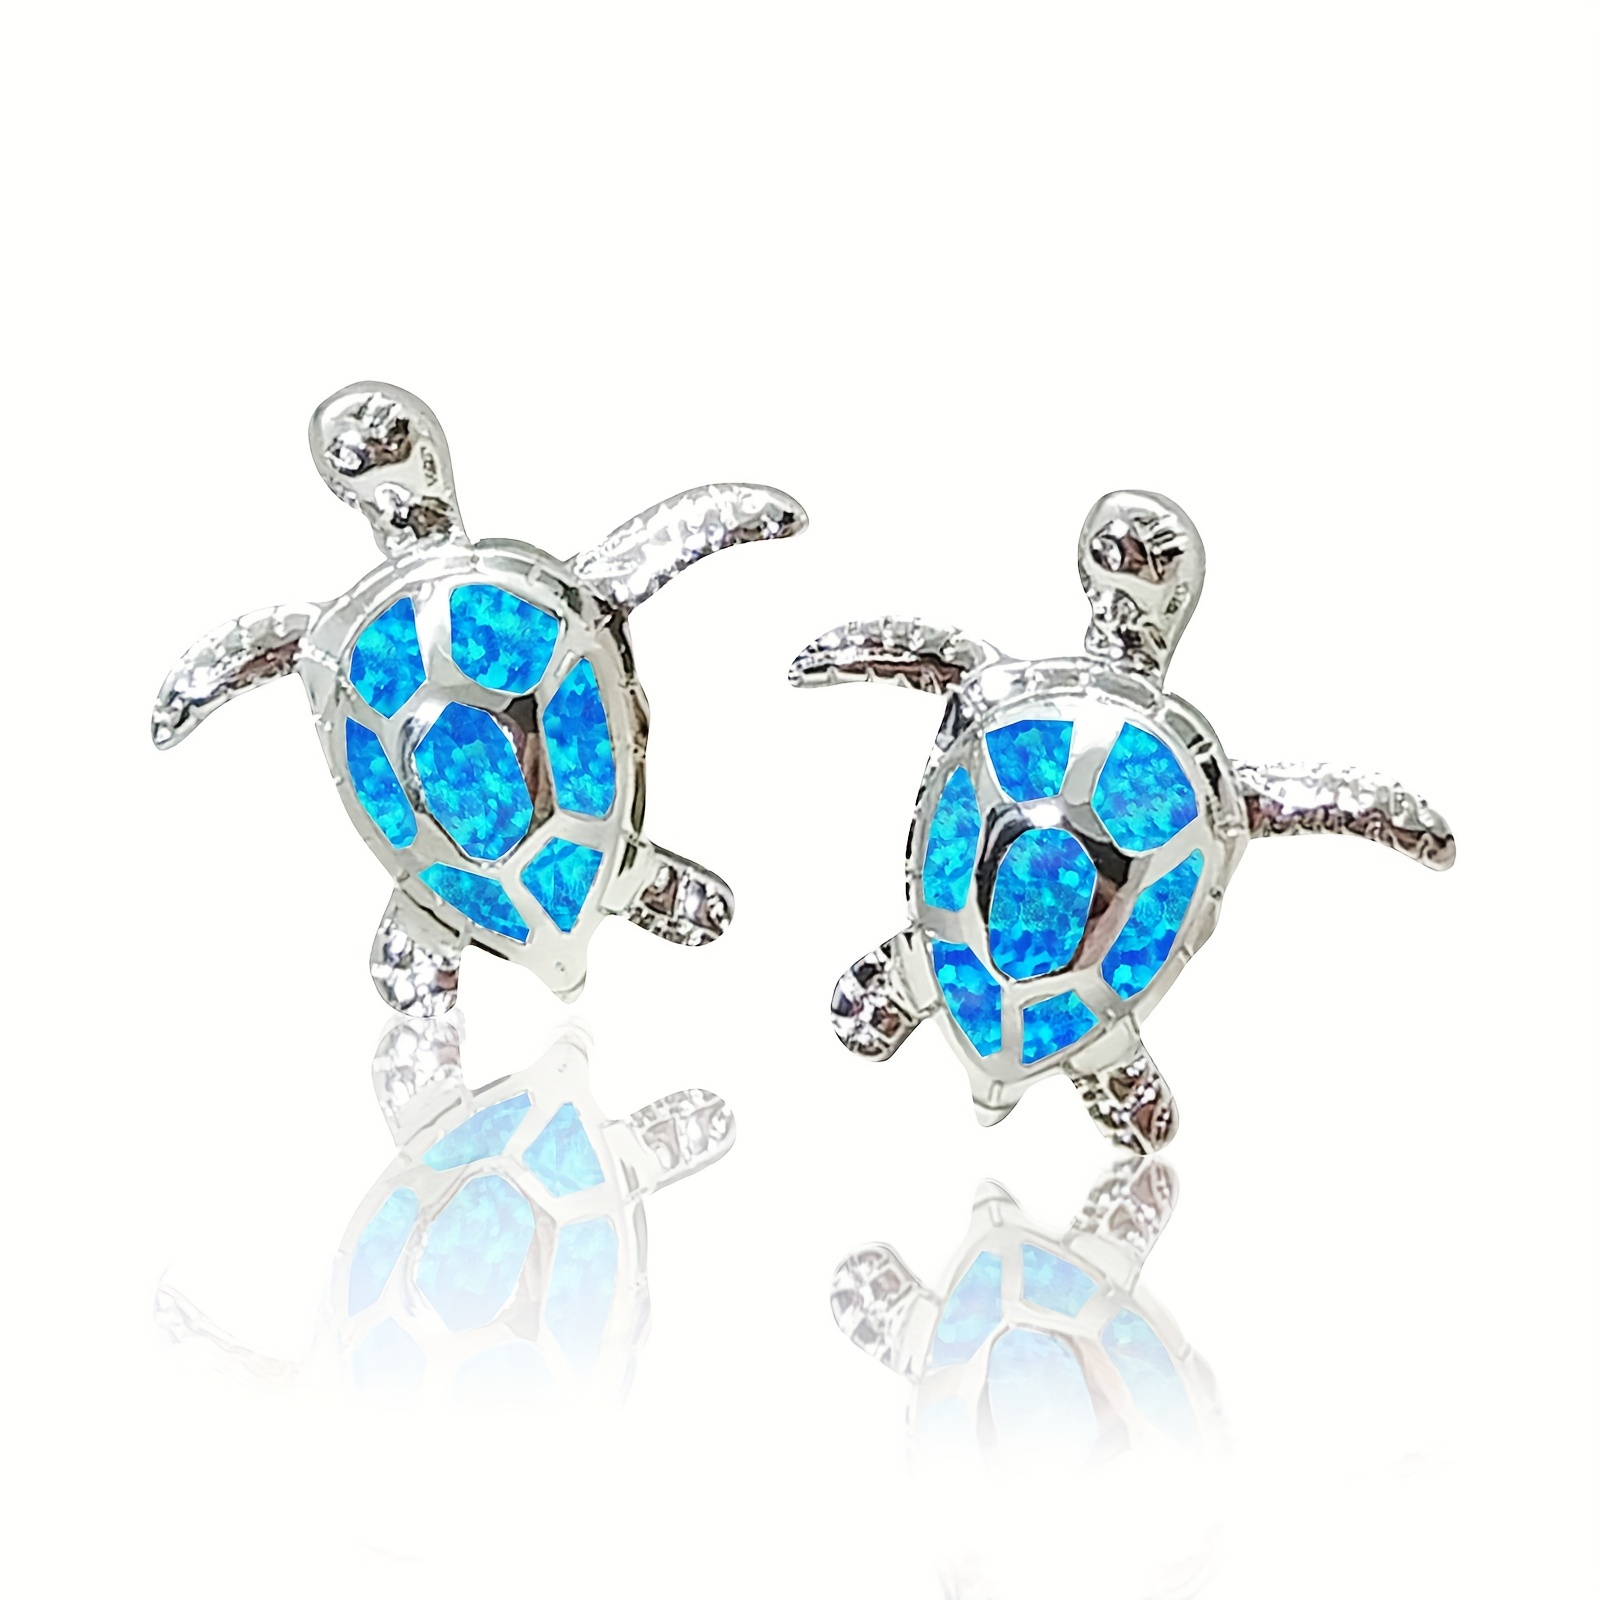 

Ocean Series Hawaiian Turtle Design Stud Earrings With Blue Opal Decor Copper Silver Plated Jewelry Creative Female Gift